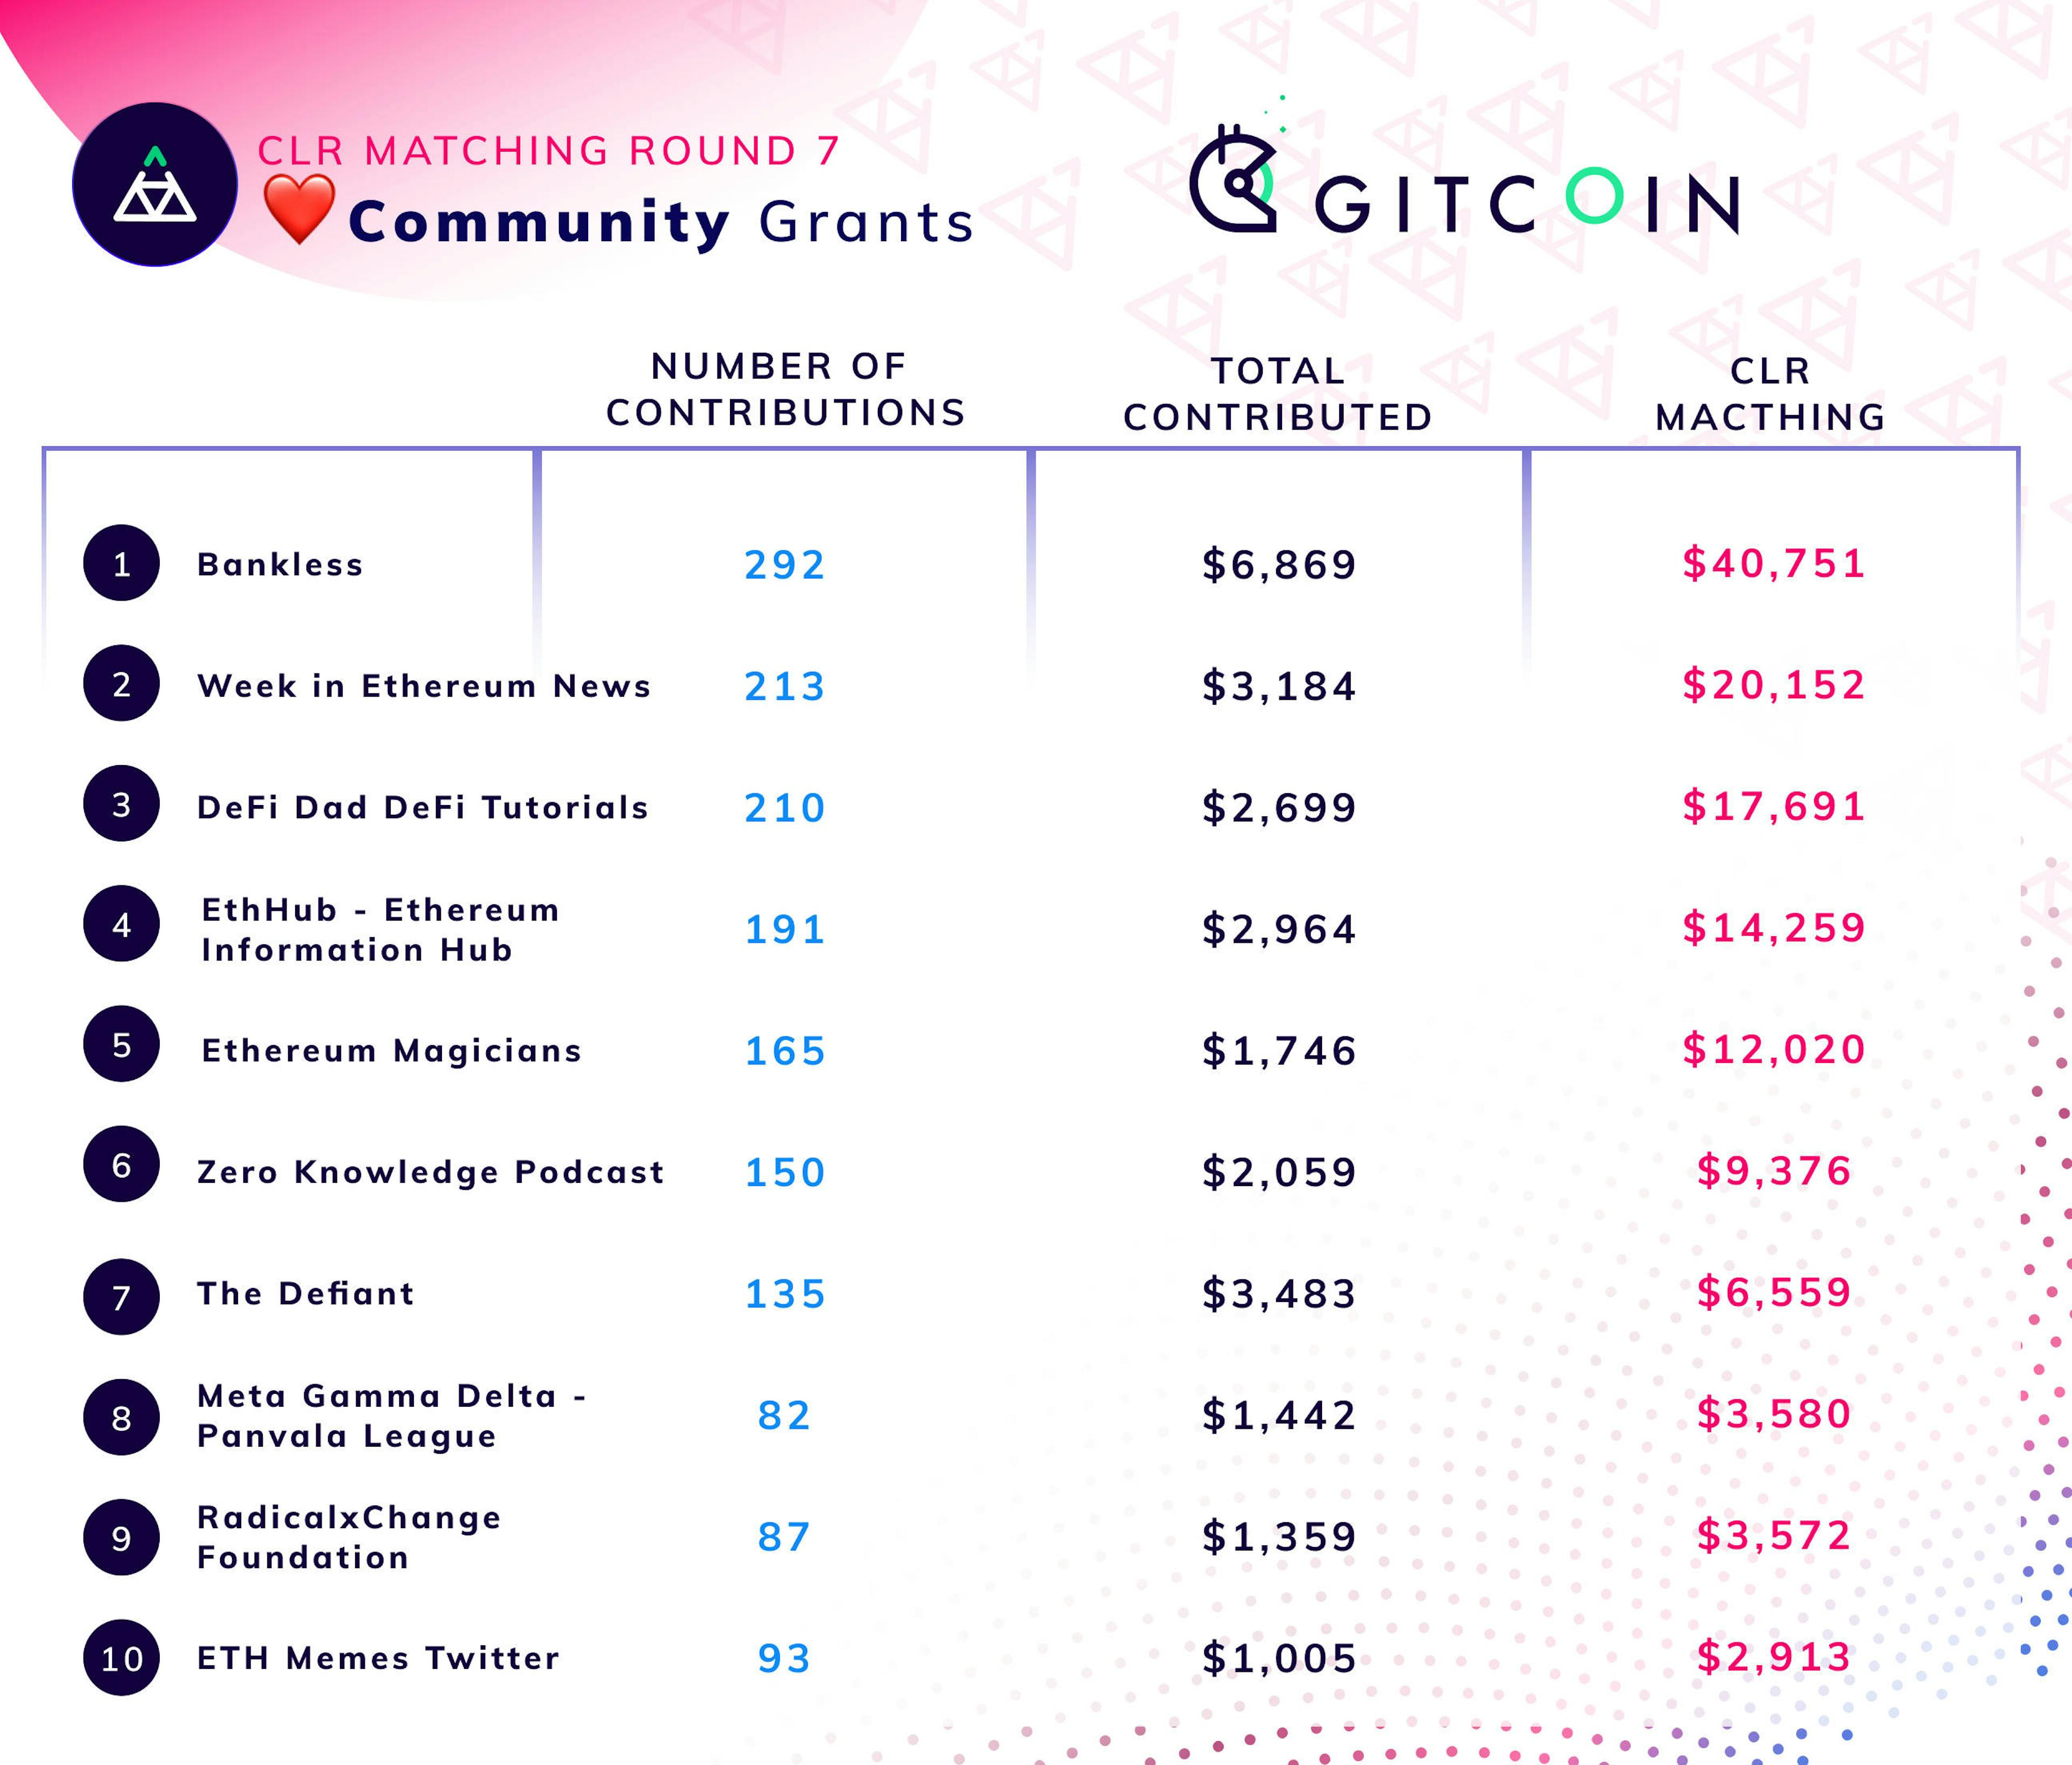 Examples of important public goods in the Ethereum ecosystem that were funded by the recent Gitcoin quadratic funding round. Open source software ecosystems, including blockchains, are hugely dependent on public goods.